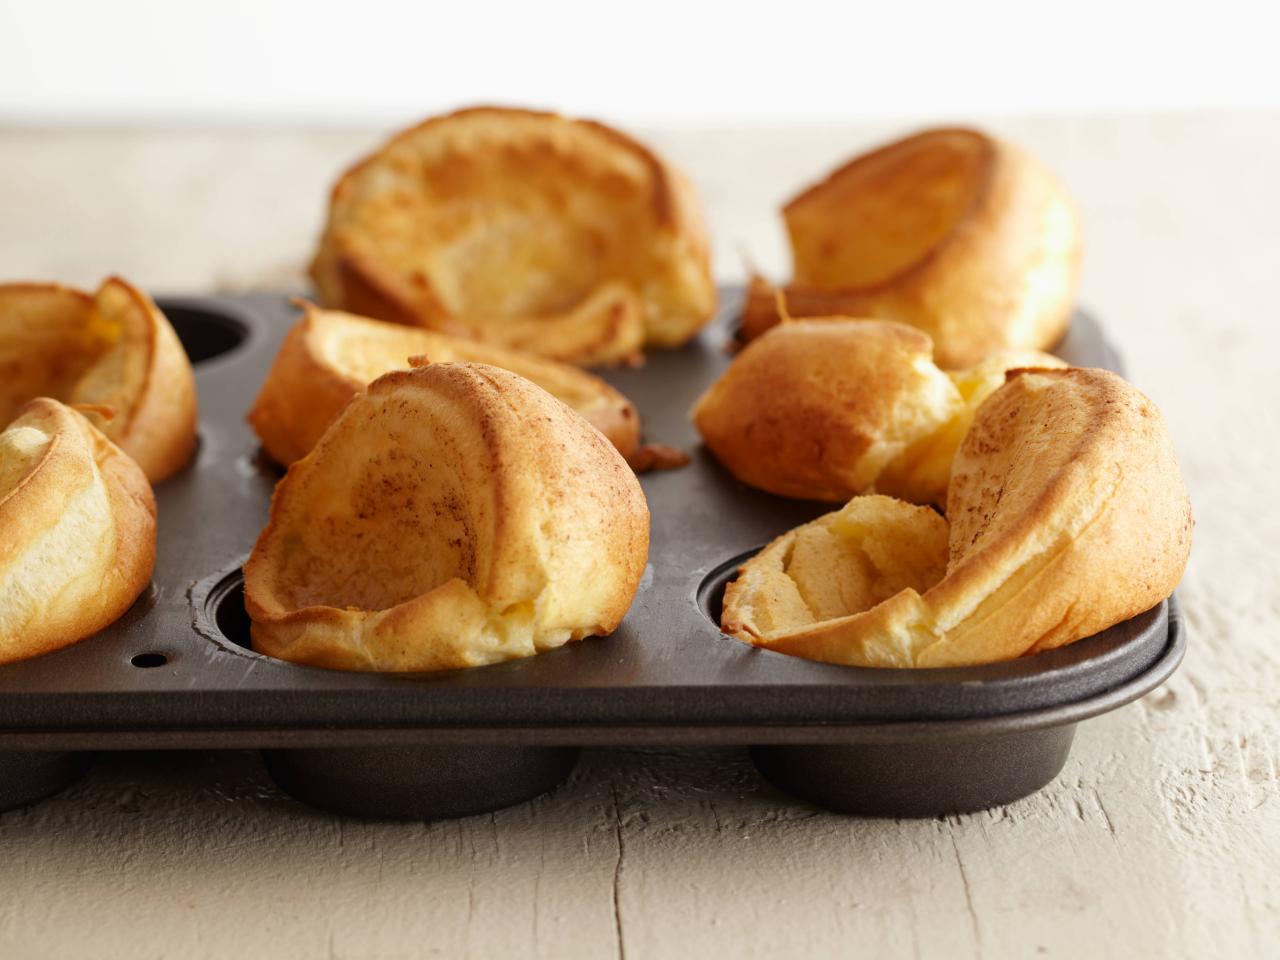 Golden Popover Mix and Standard Popover Pan Set